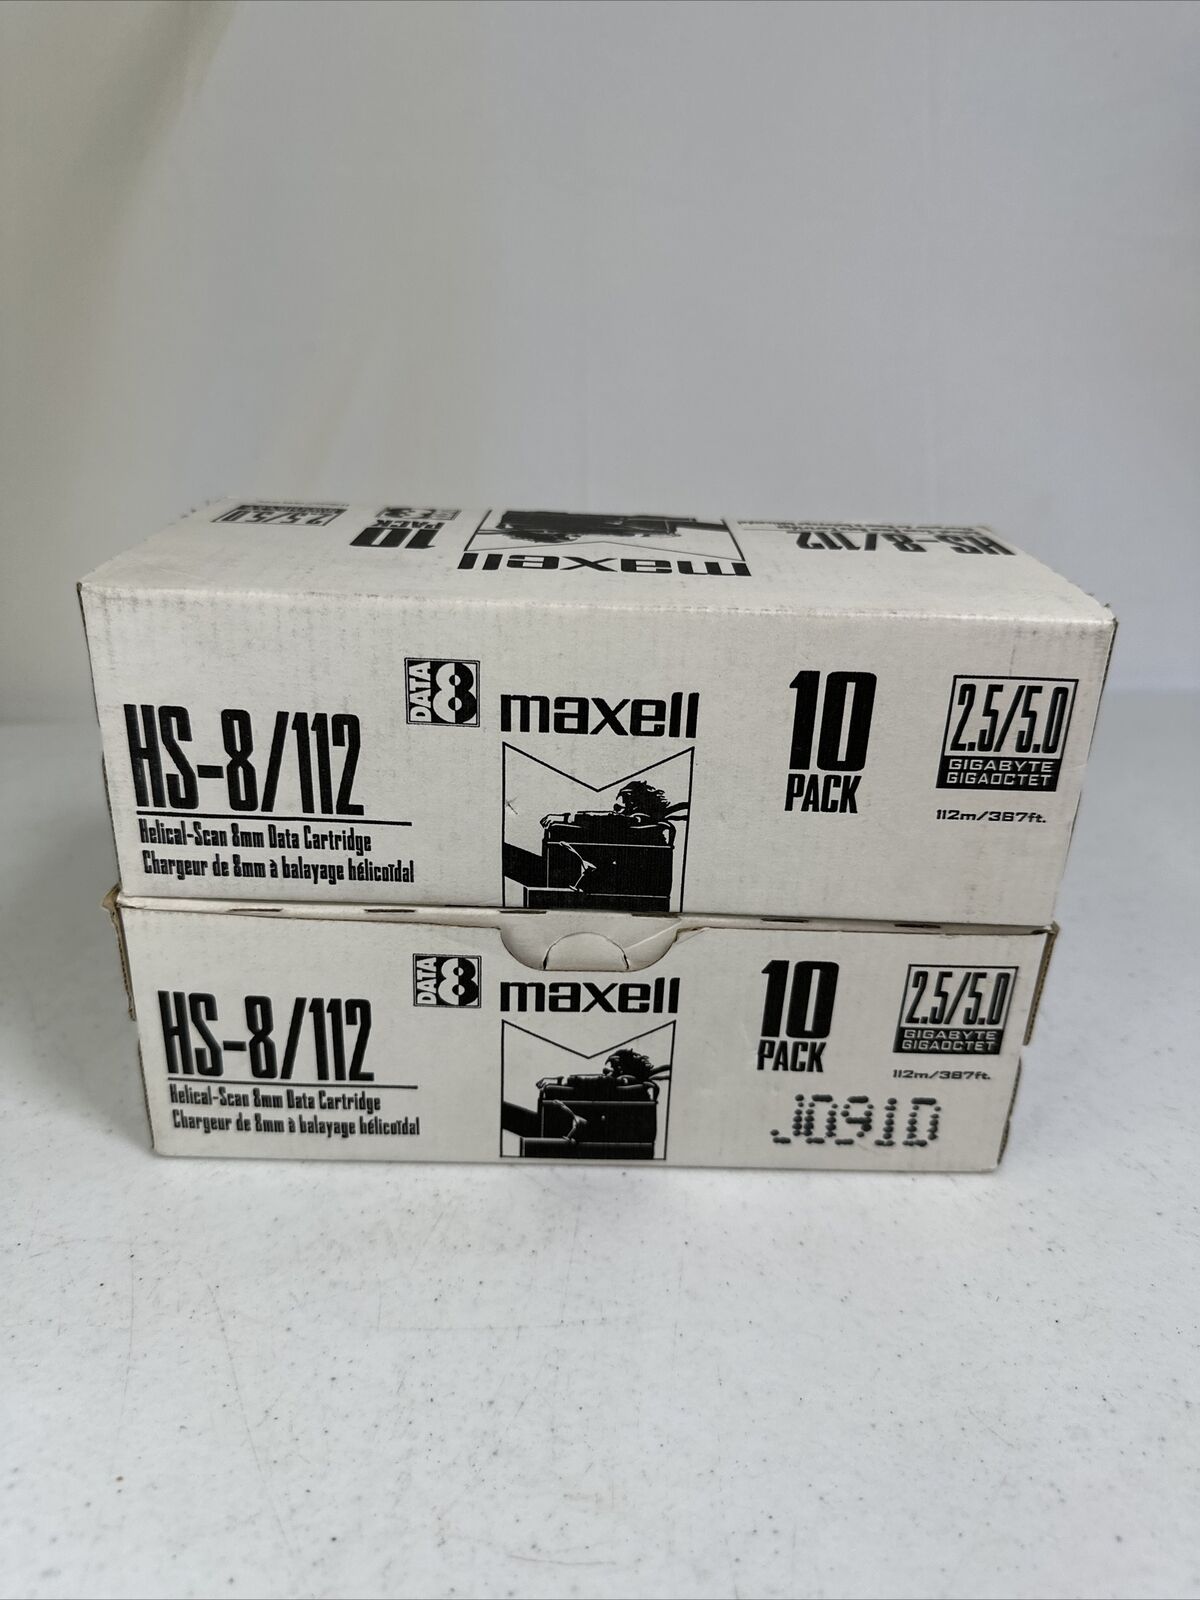 Lot of 20 New Maxell HS-8/112 Helical Scan 8mm Data Cartridge 2x 10 Pack SEALED